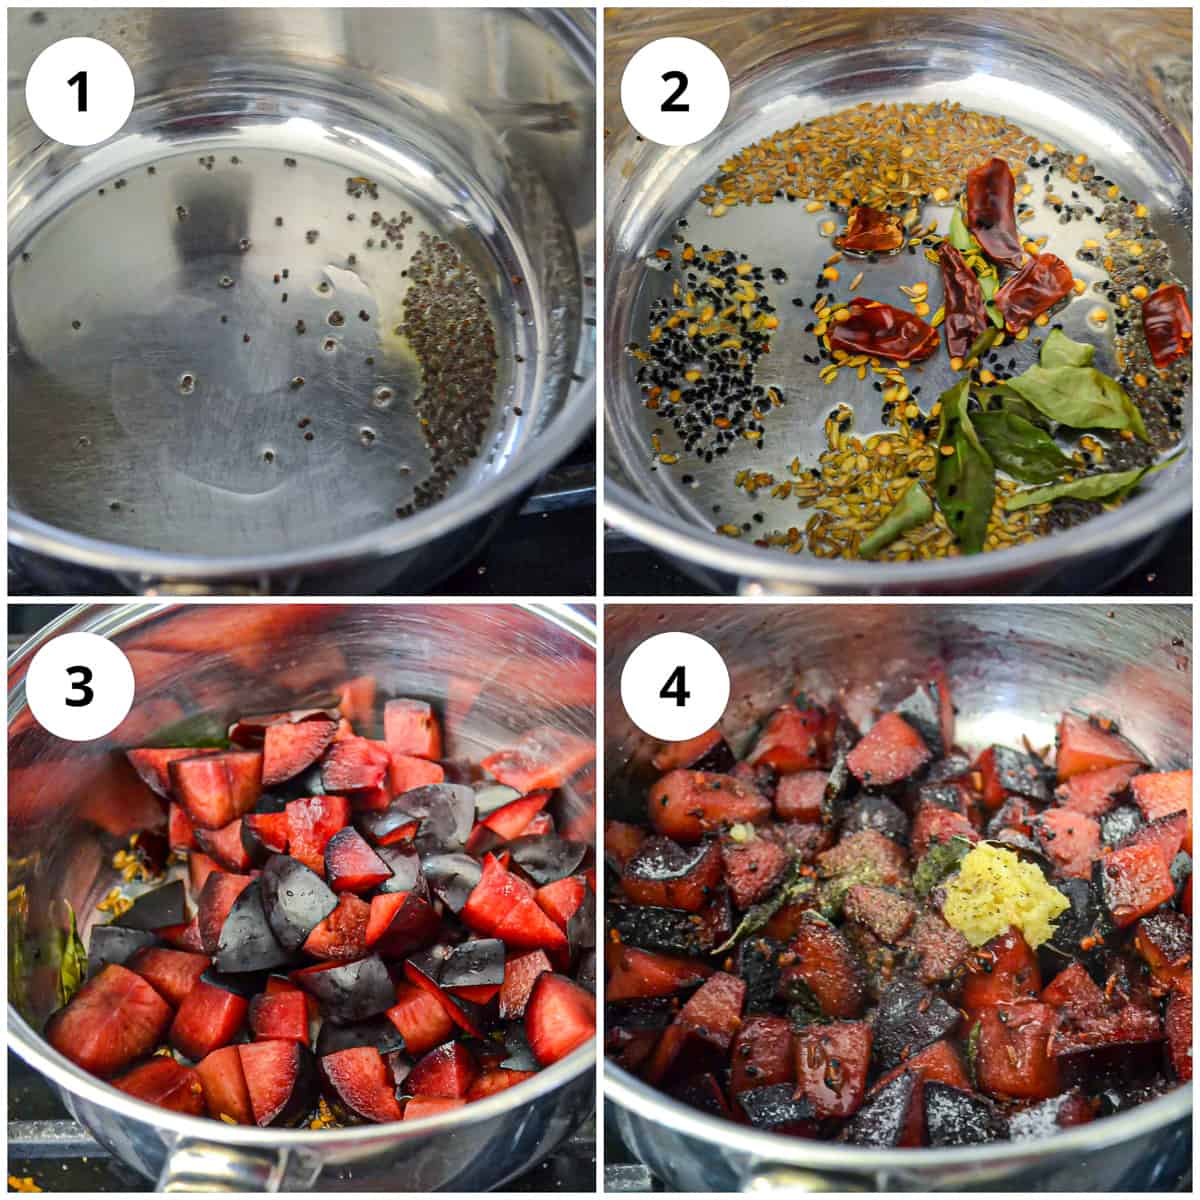 Photos to show heating the spices and start cooking the plums